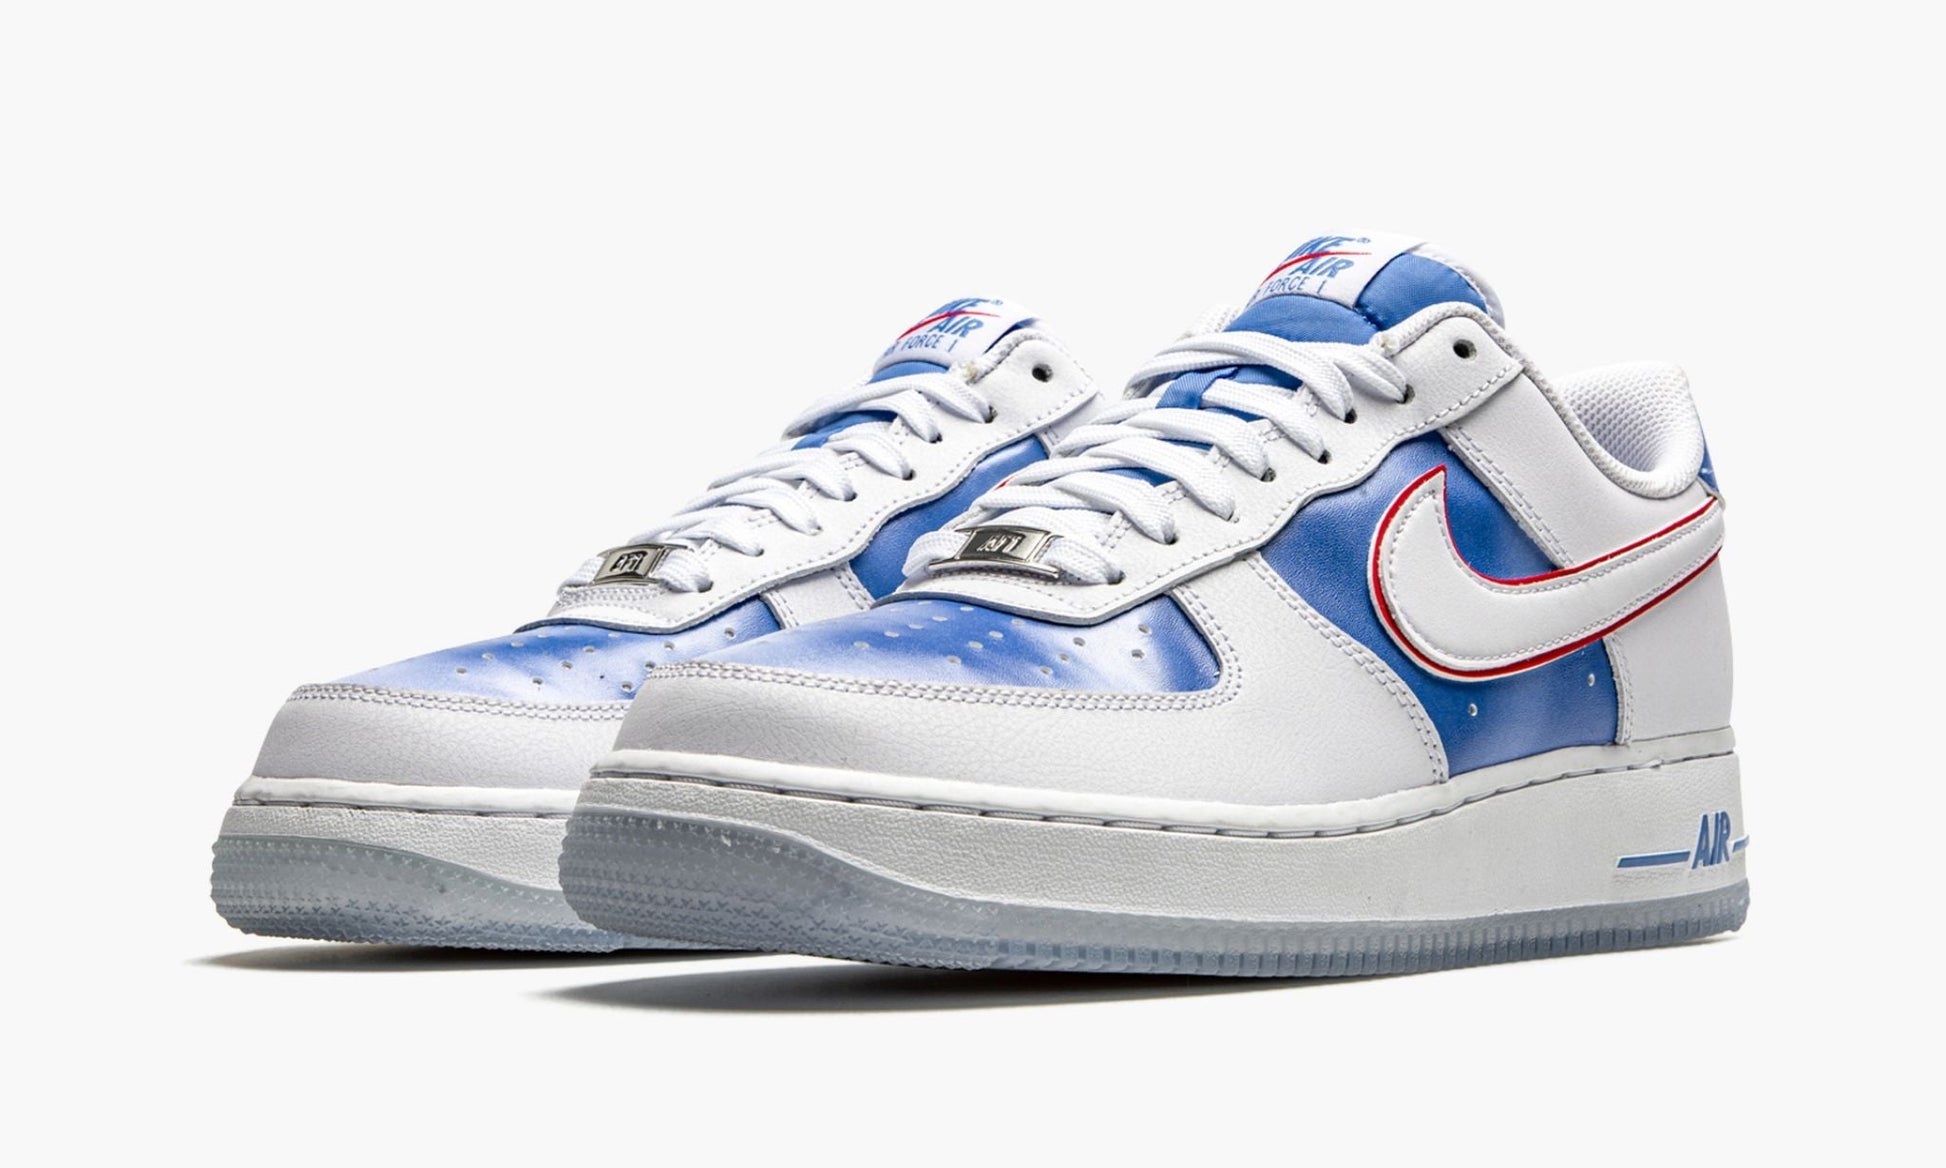 Air Force 1 '07 "Pacific Blue"